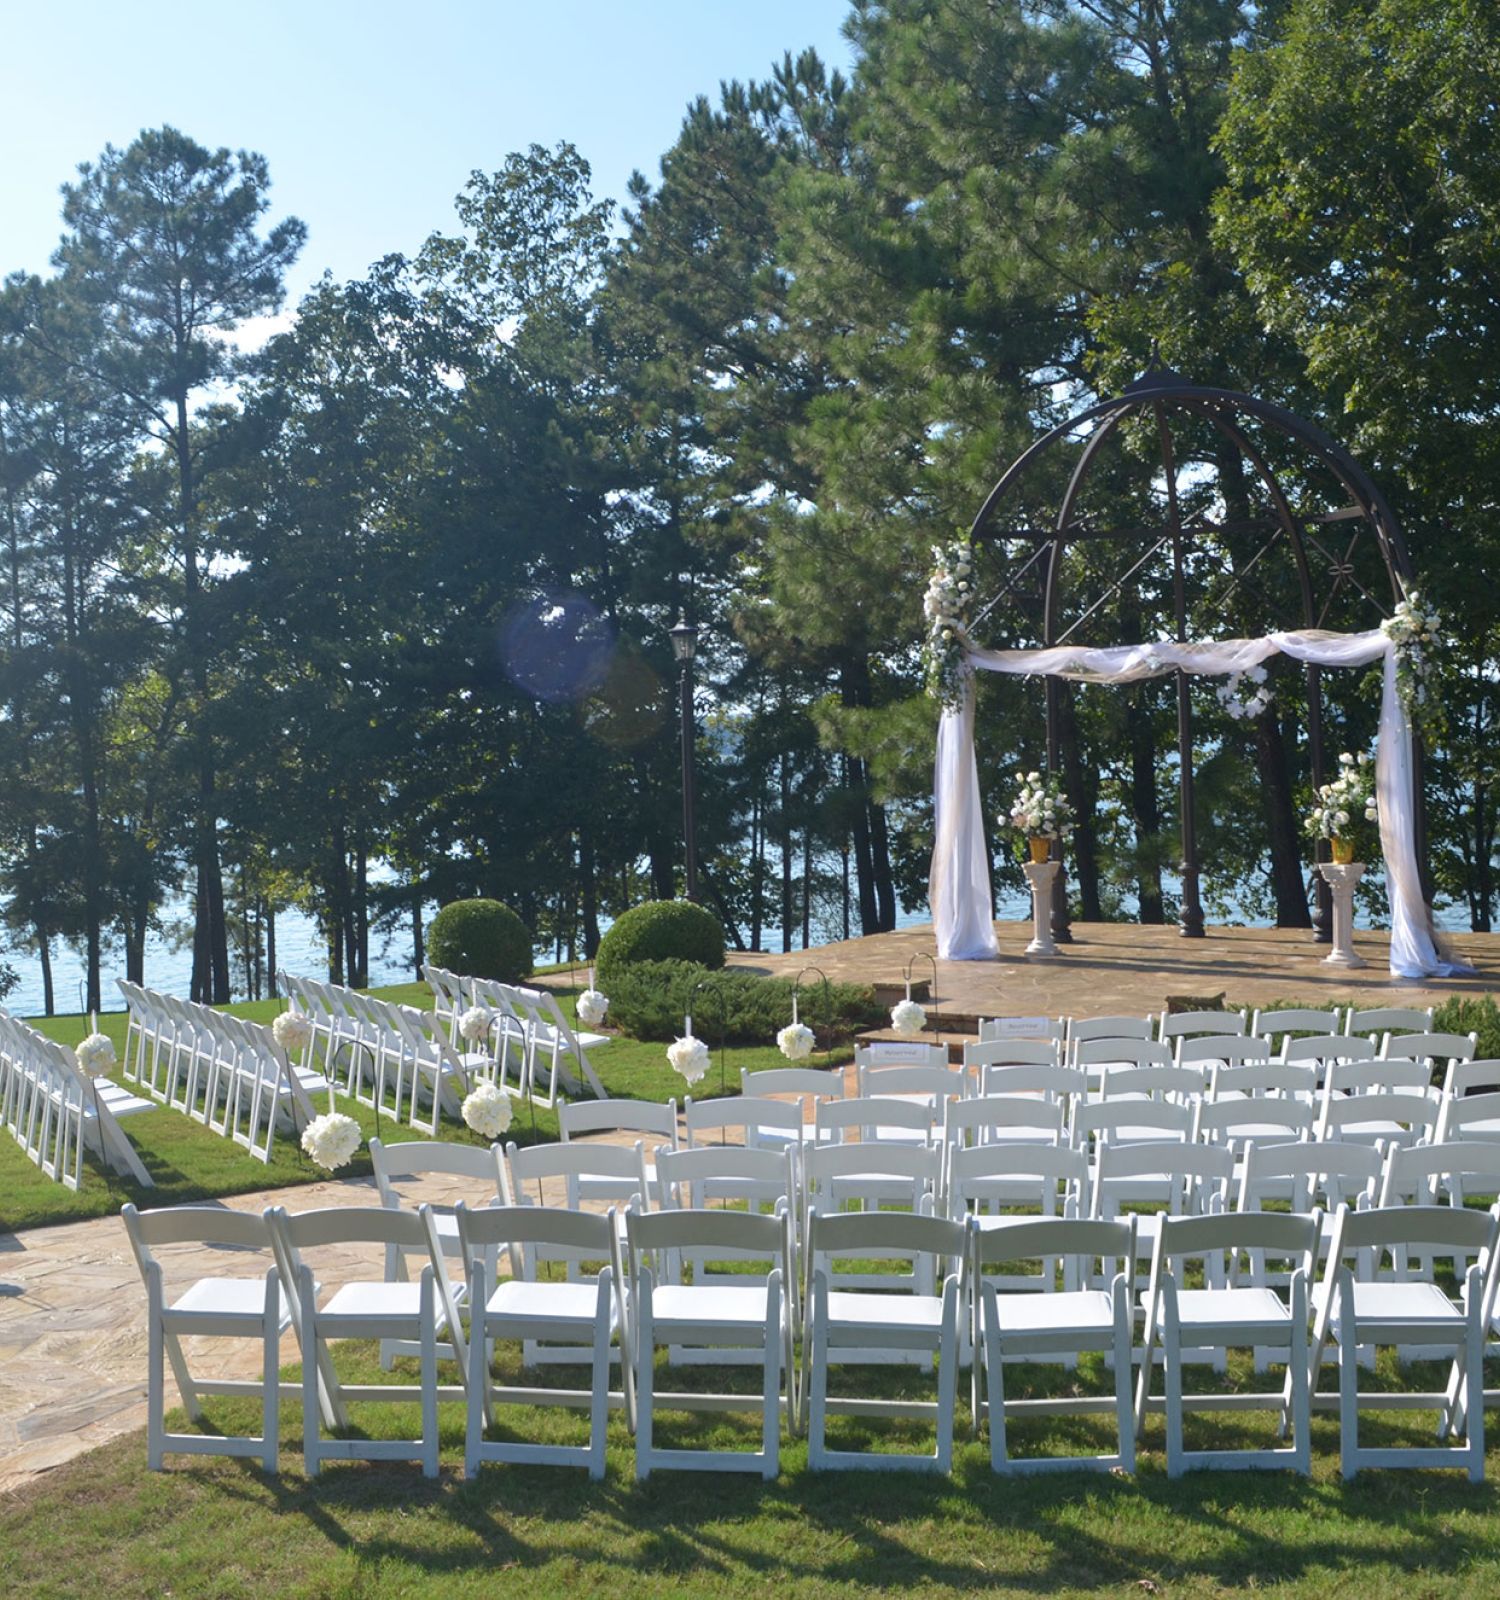 An outdoor wedding setup with white chairs, a decorated arch, and a scenic background of trees and a body of water.